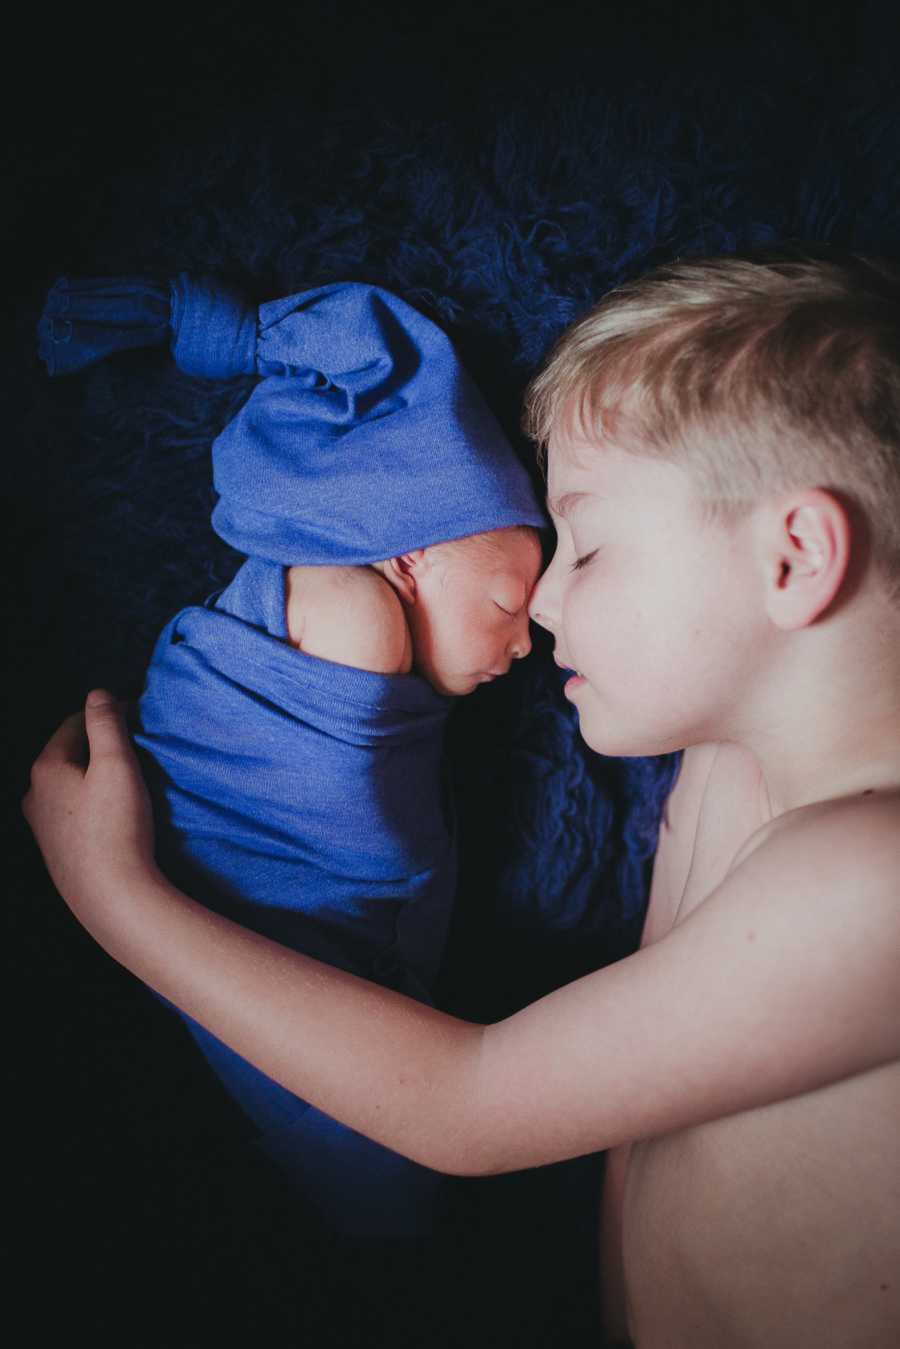 Big brother embraces his baby brother wrapped in blue blanket and hat